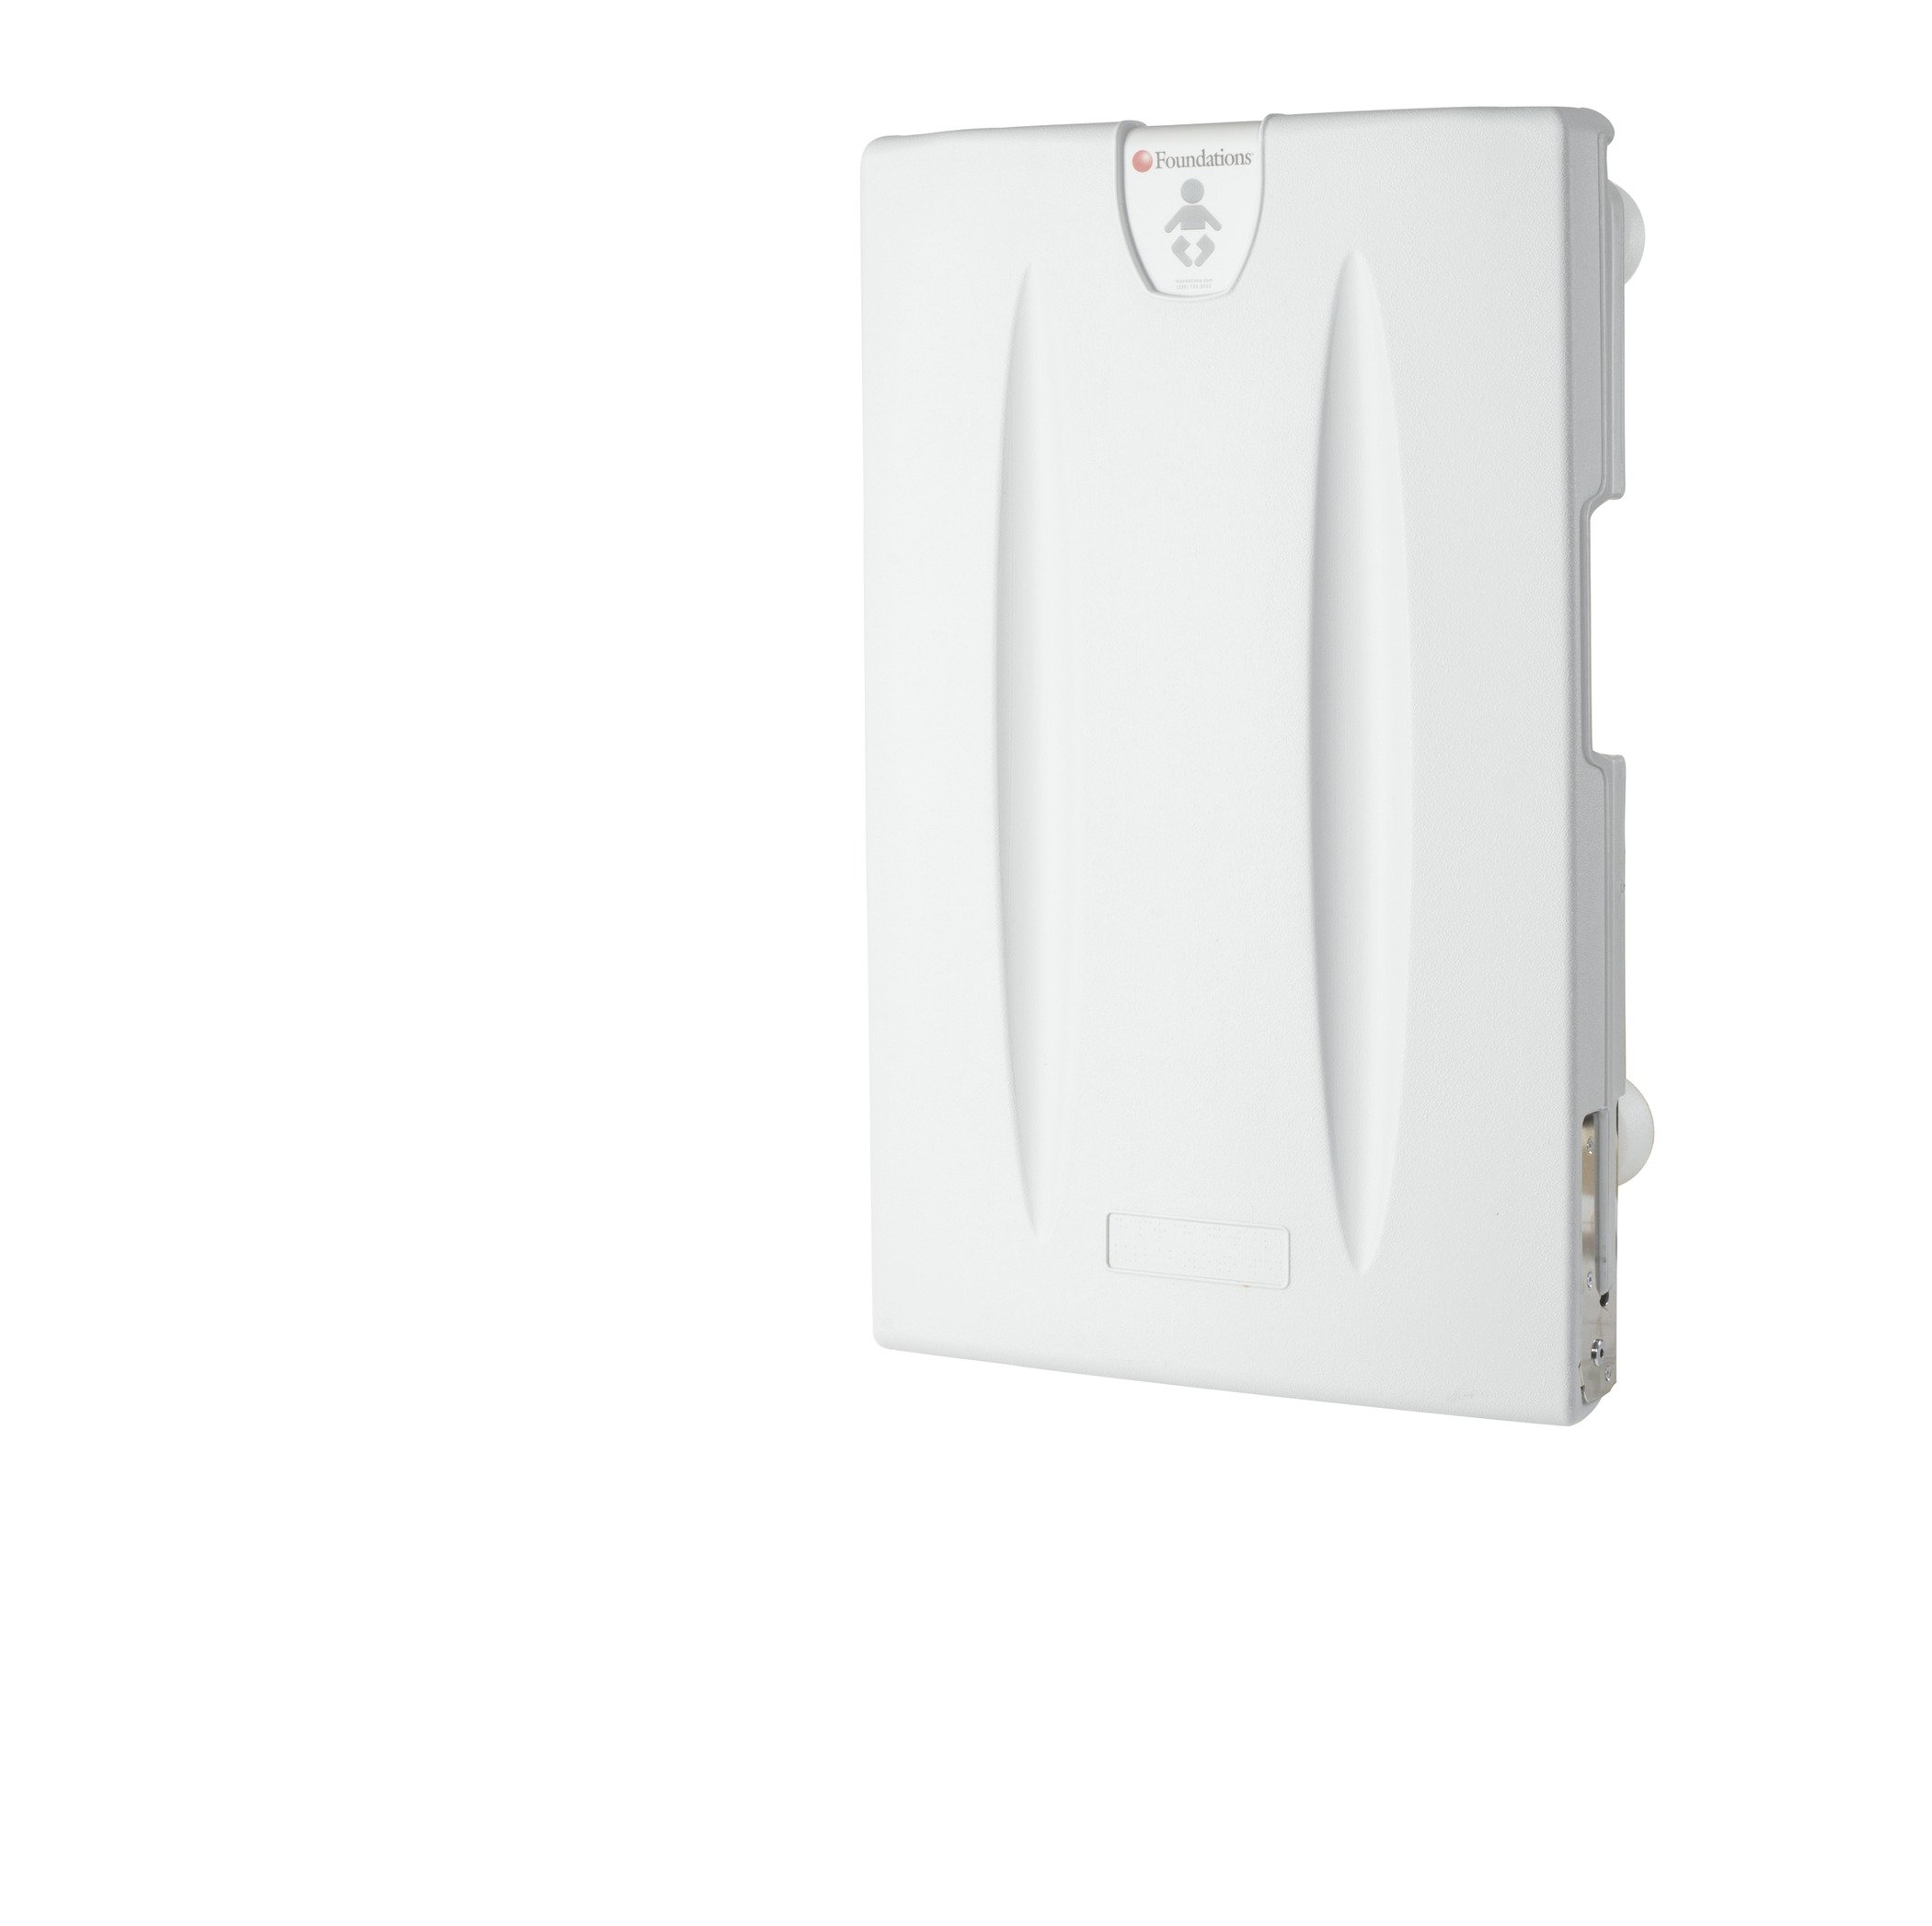 Foundations Classic Vertical Baby Changing Station, Surface Mount with Backer-Plate, Light Gray (100-EV-BP)